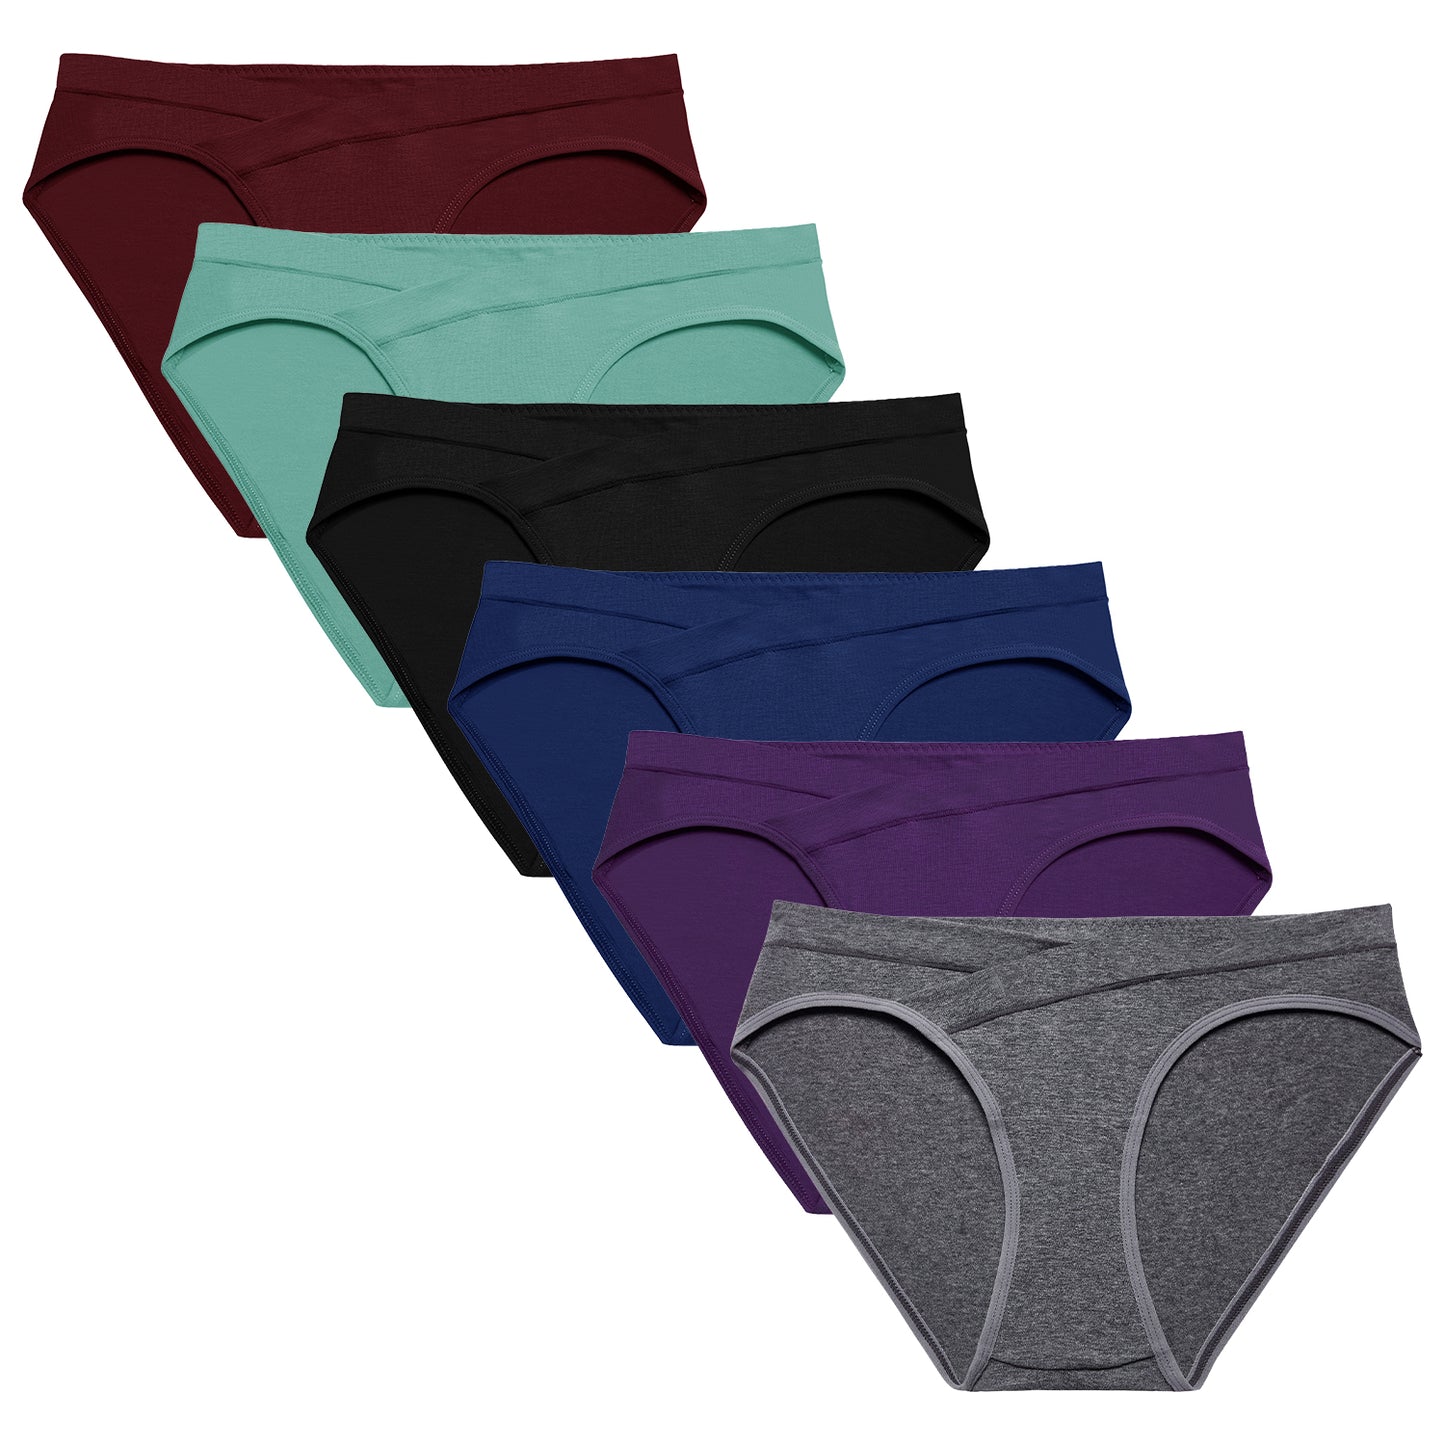 Xysaqa 5 Pack Women's Seamless Cotton Mother-to-be Underwear Under the Bump  V-Shape Cross Breathable Soft Bikini Hipster Panties on Clearance